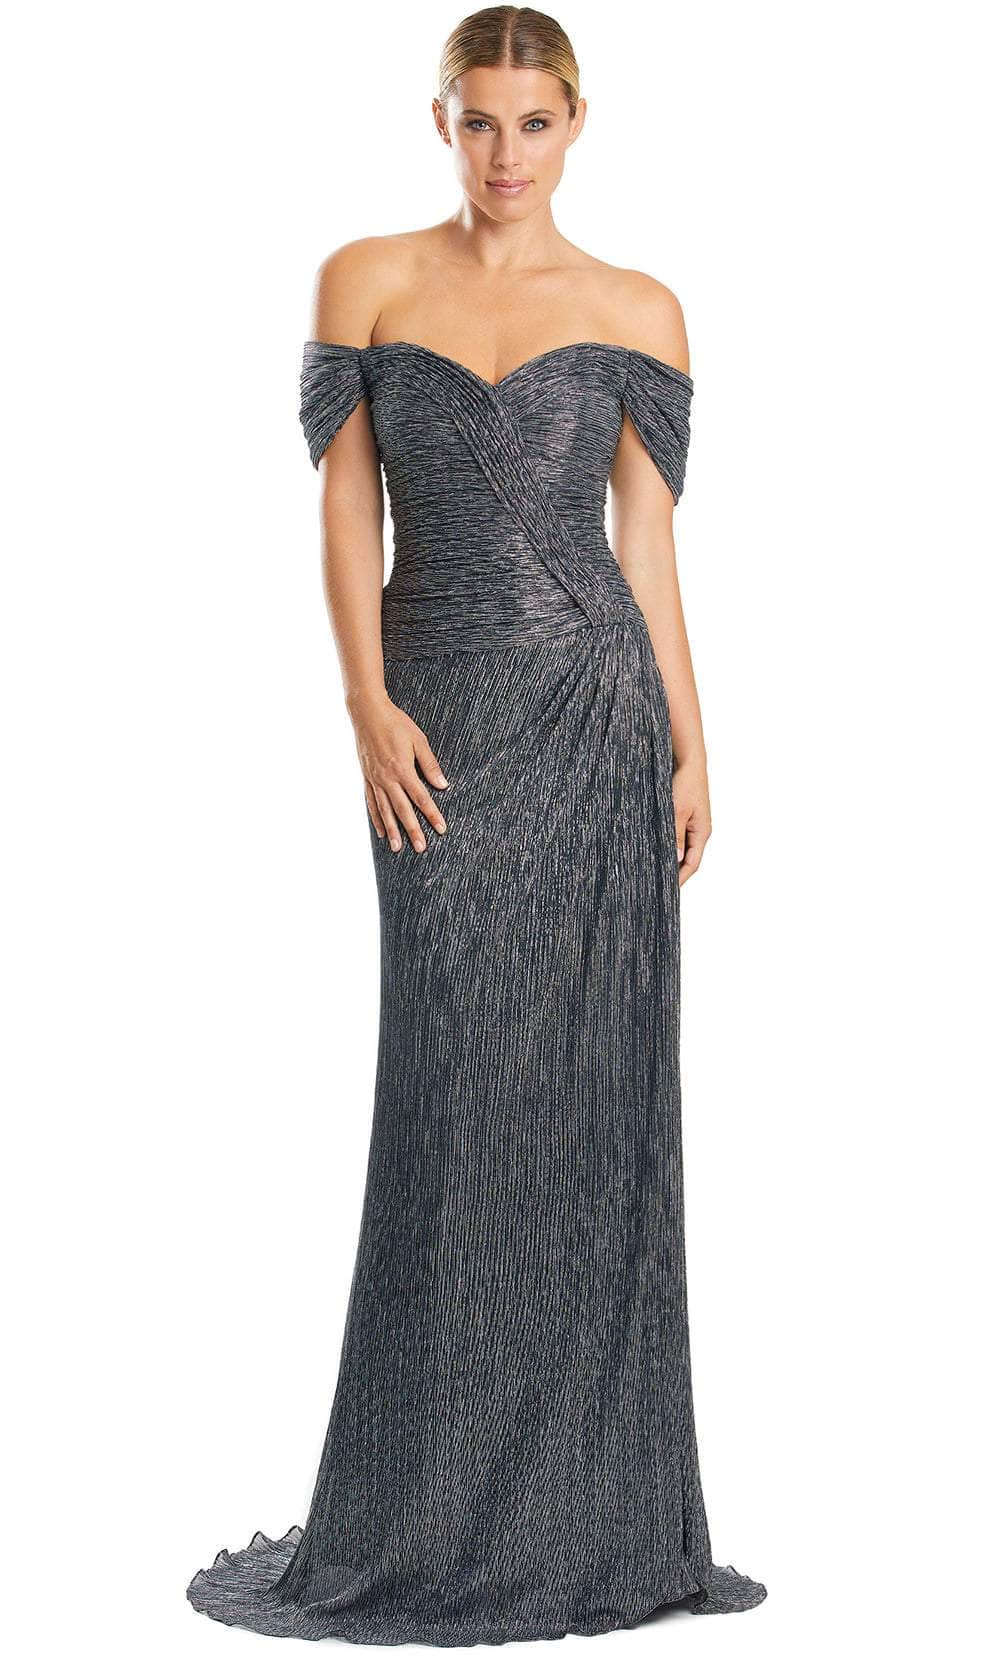 Alexander by Daymor 1858F23 - Off-Shoulder Ruched Prom Dress Special Occasion Dress 00 / Silver